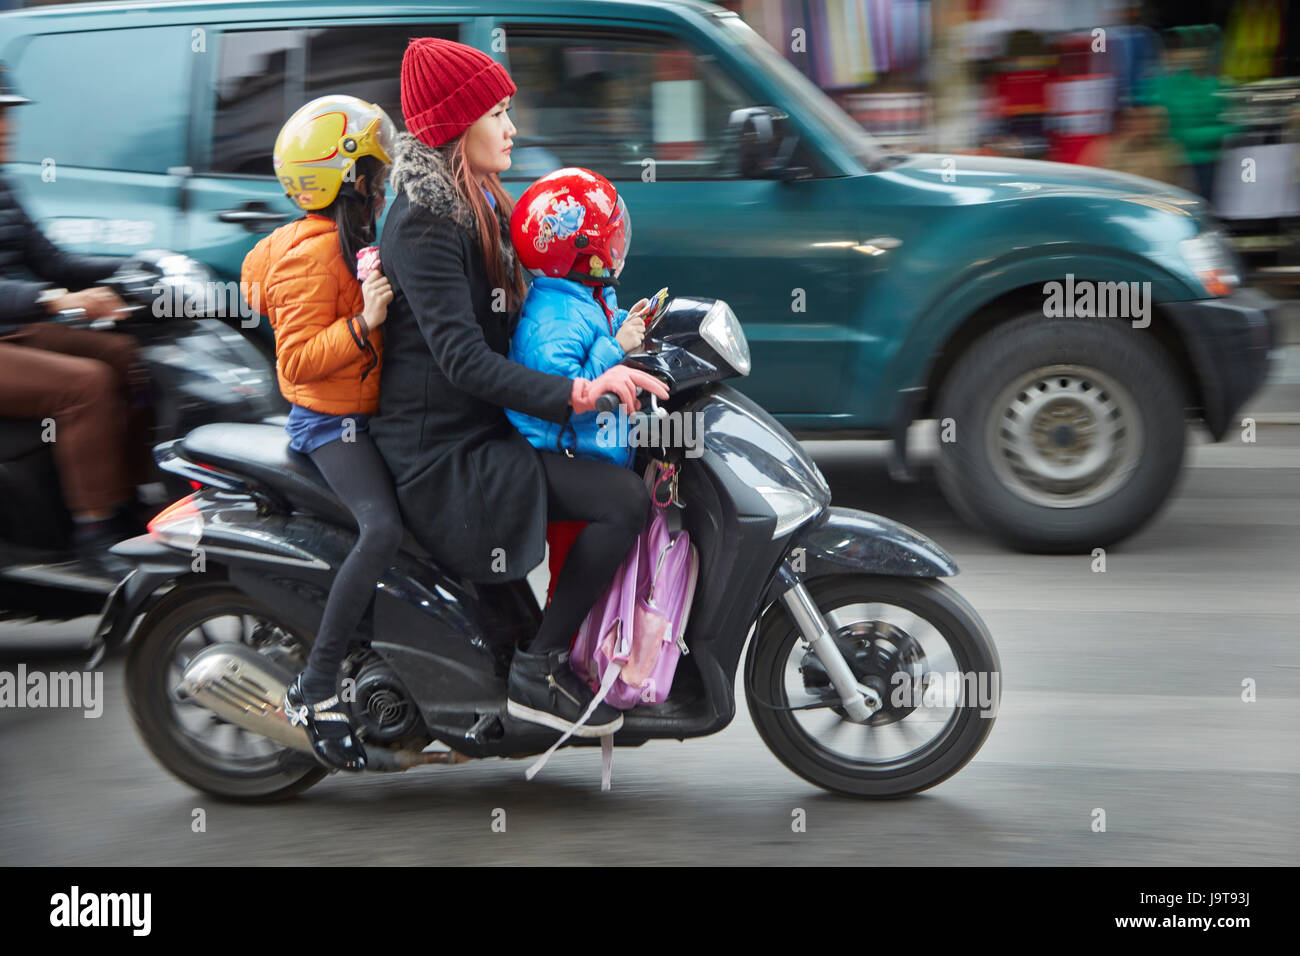 Mother and children on scooter, Old Quarter, Hanoi, Vietnam Photo - Alamy